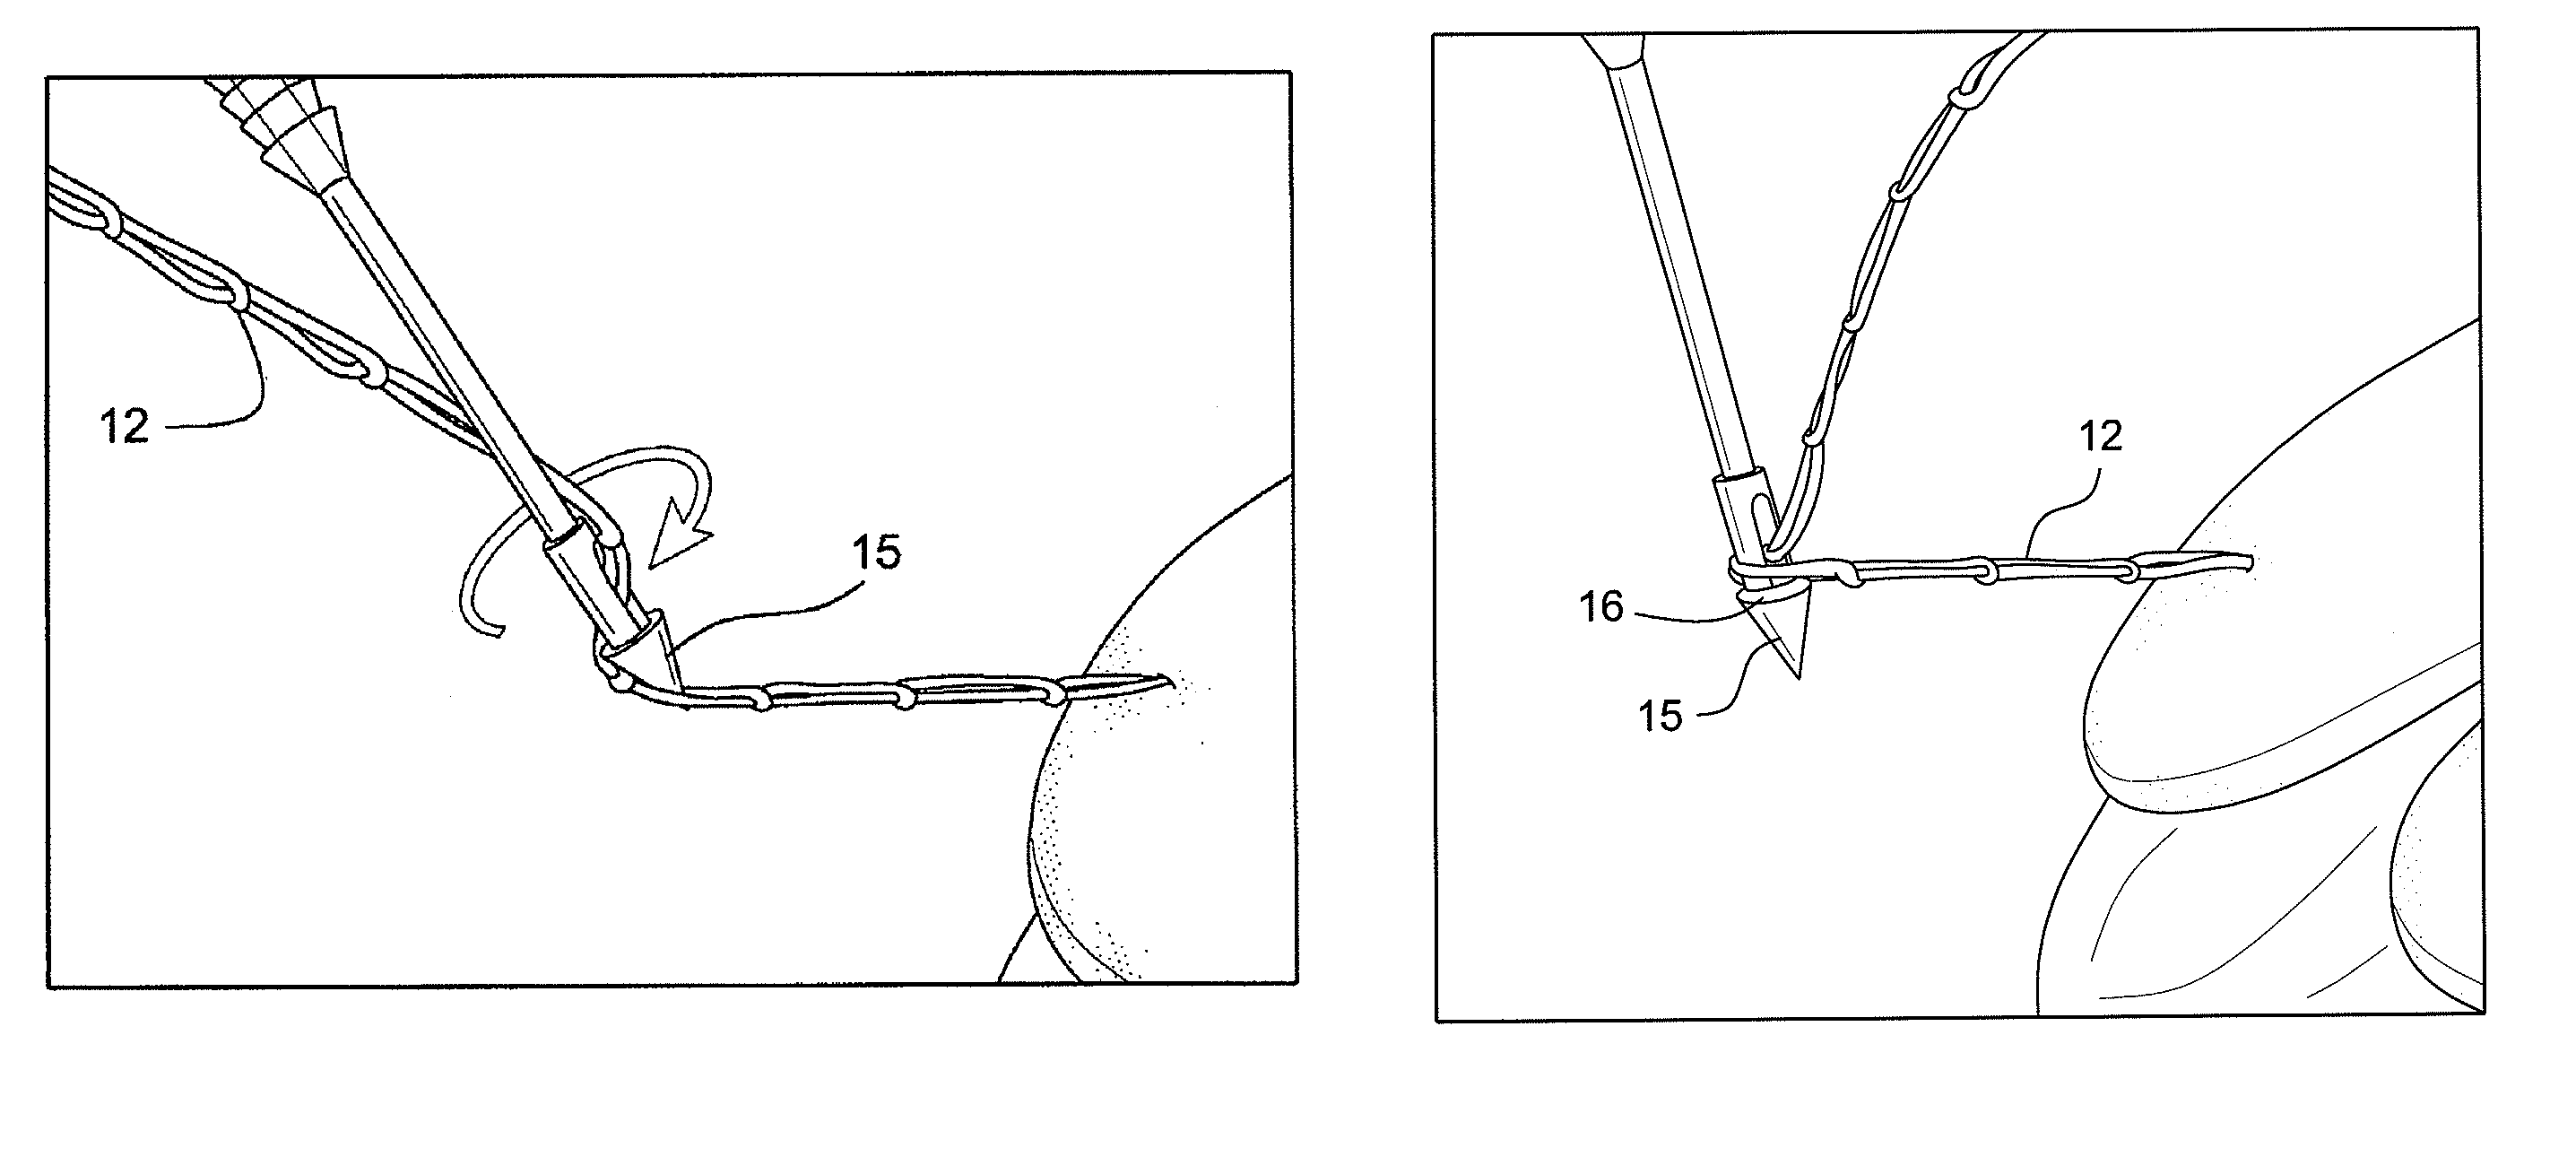 Technique for tissue fixation by capturing and anchoring a link of suture chain attached to tissue